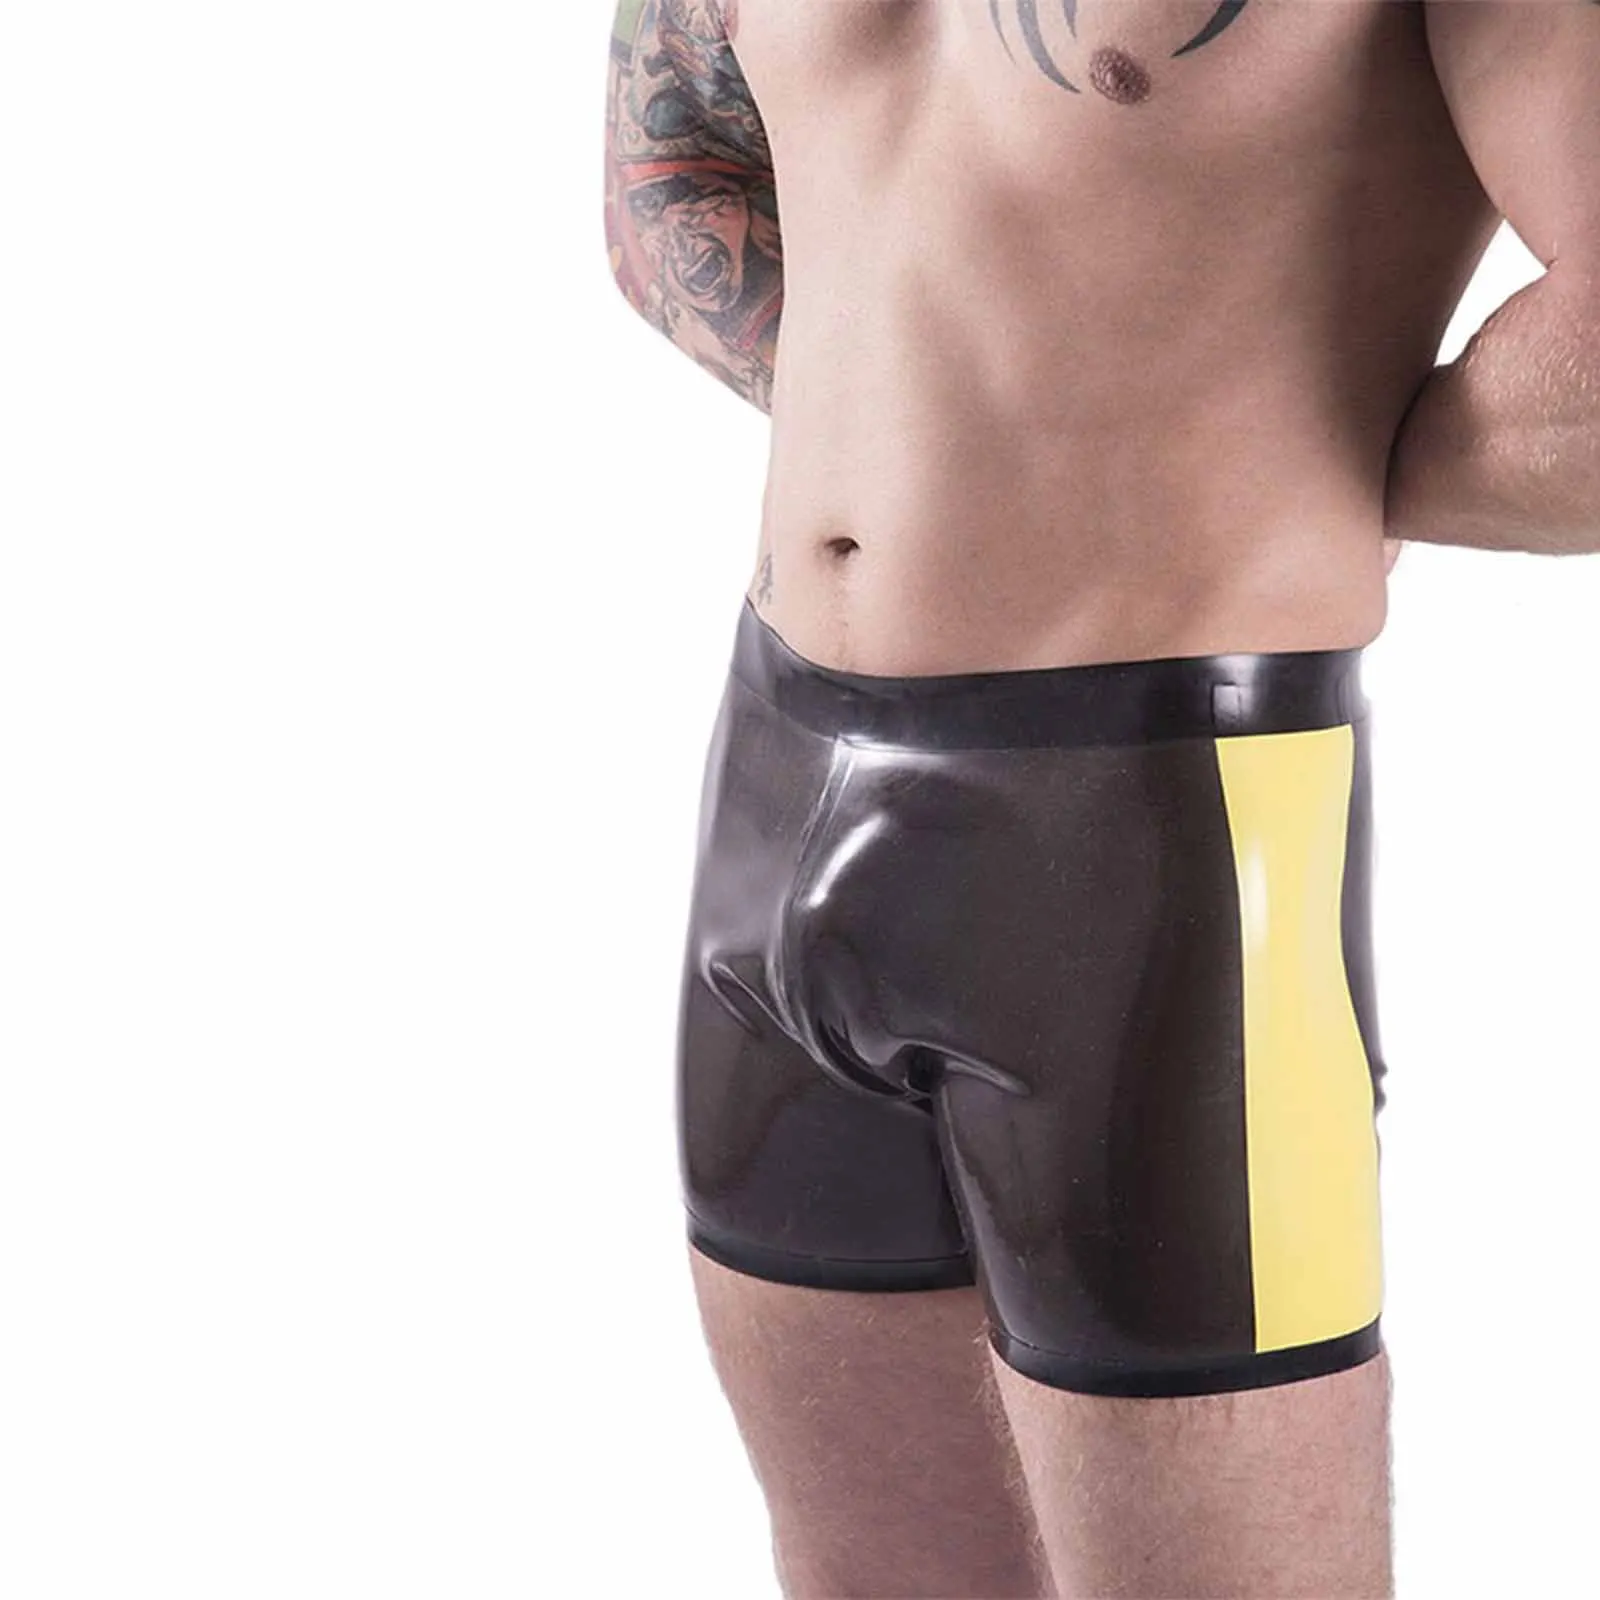 

MONNIK Boxer Shorts Men Latex Briefs Rubber Panties Tight Underwear Black and Yellow Line Design for Bodysuit Party Cosplay